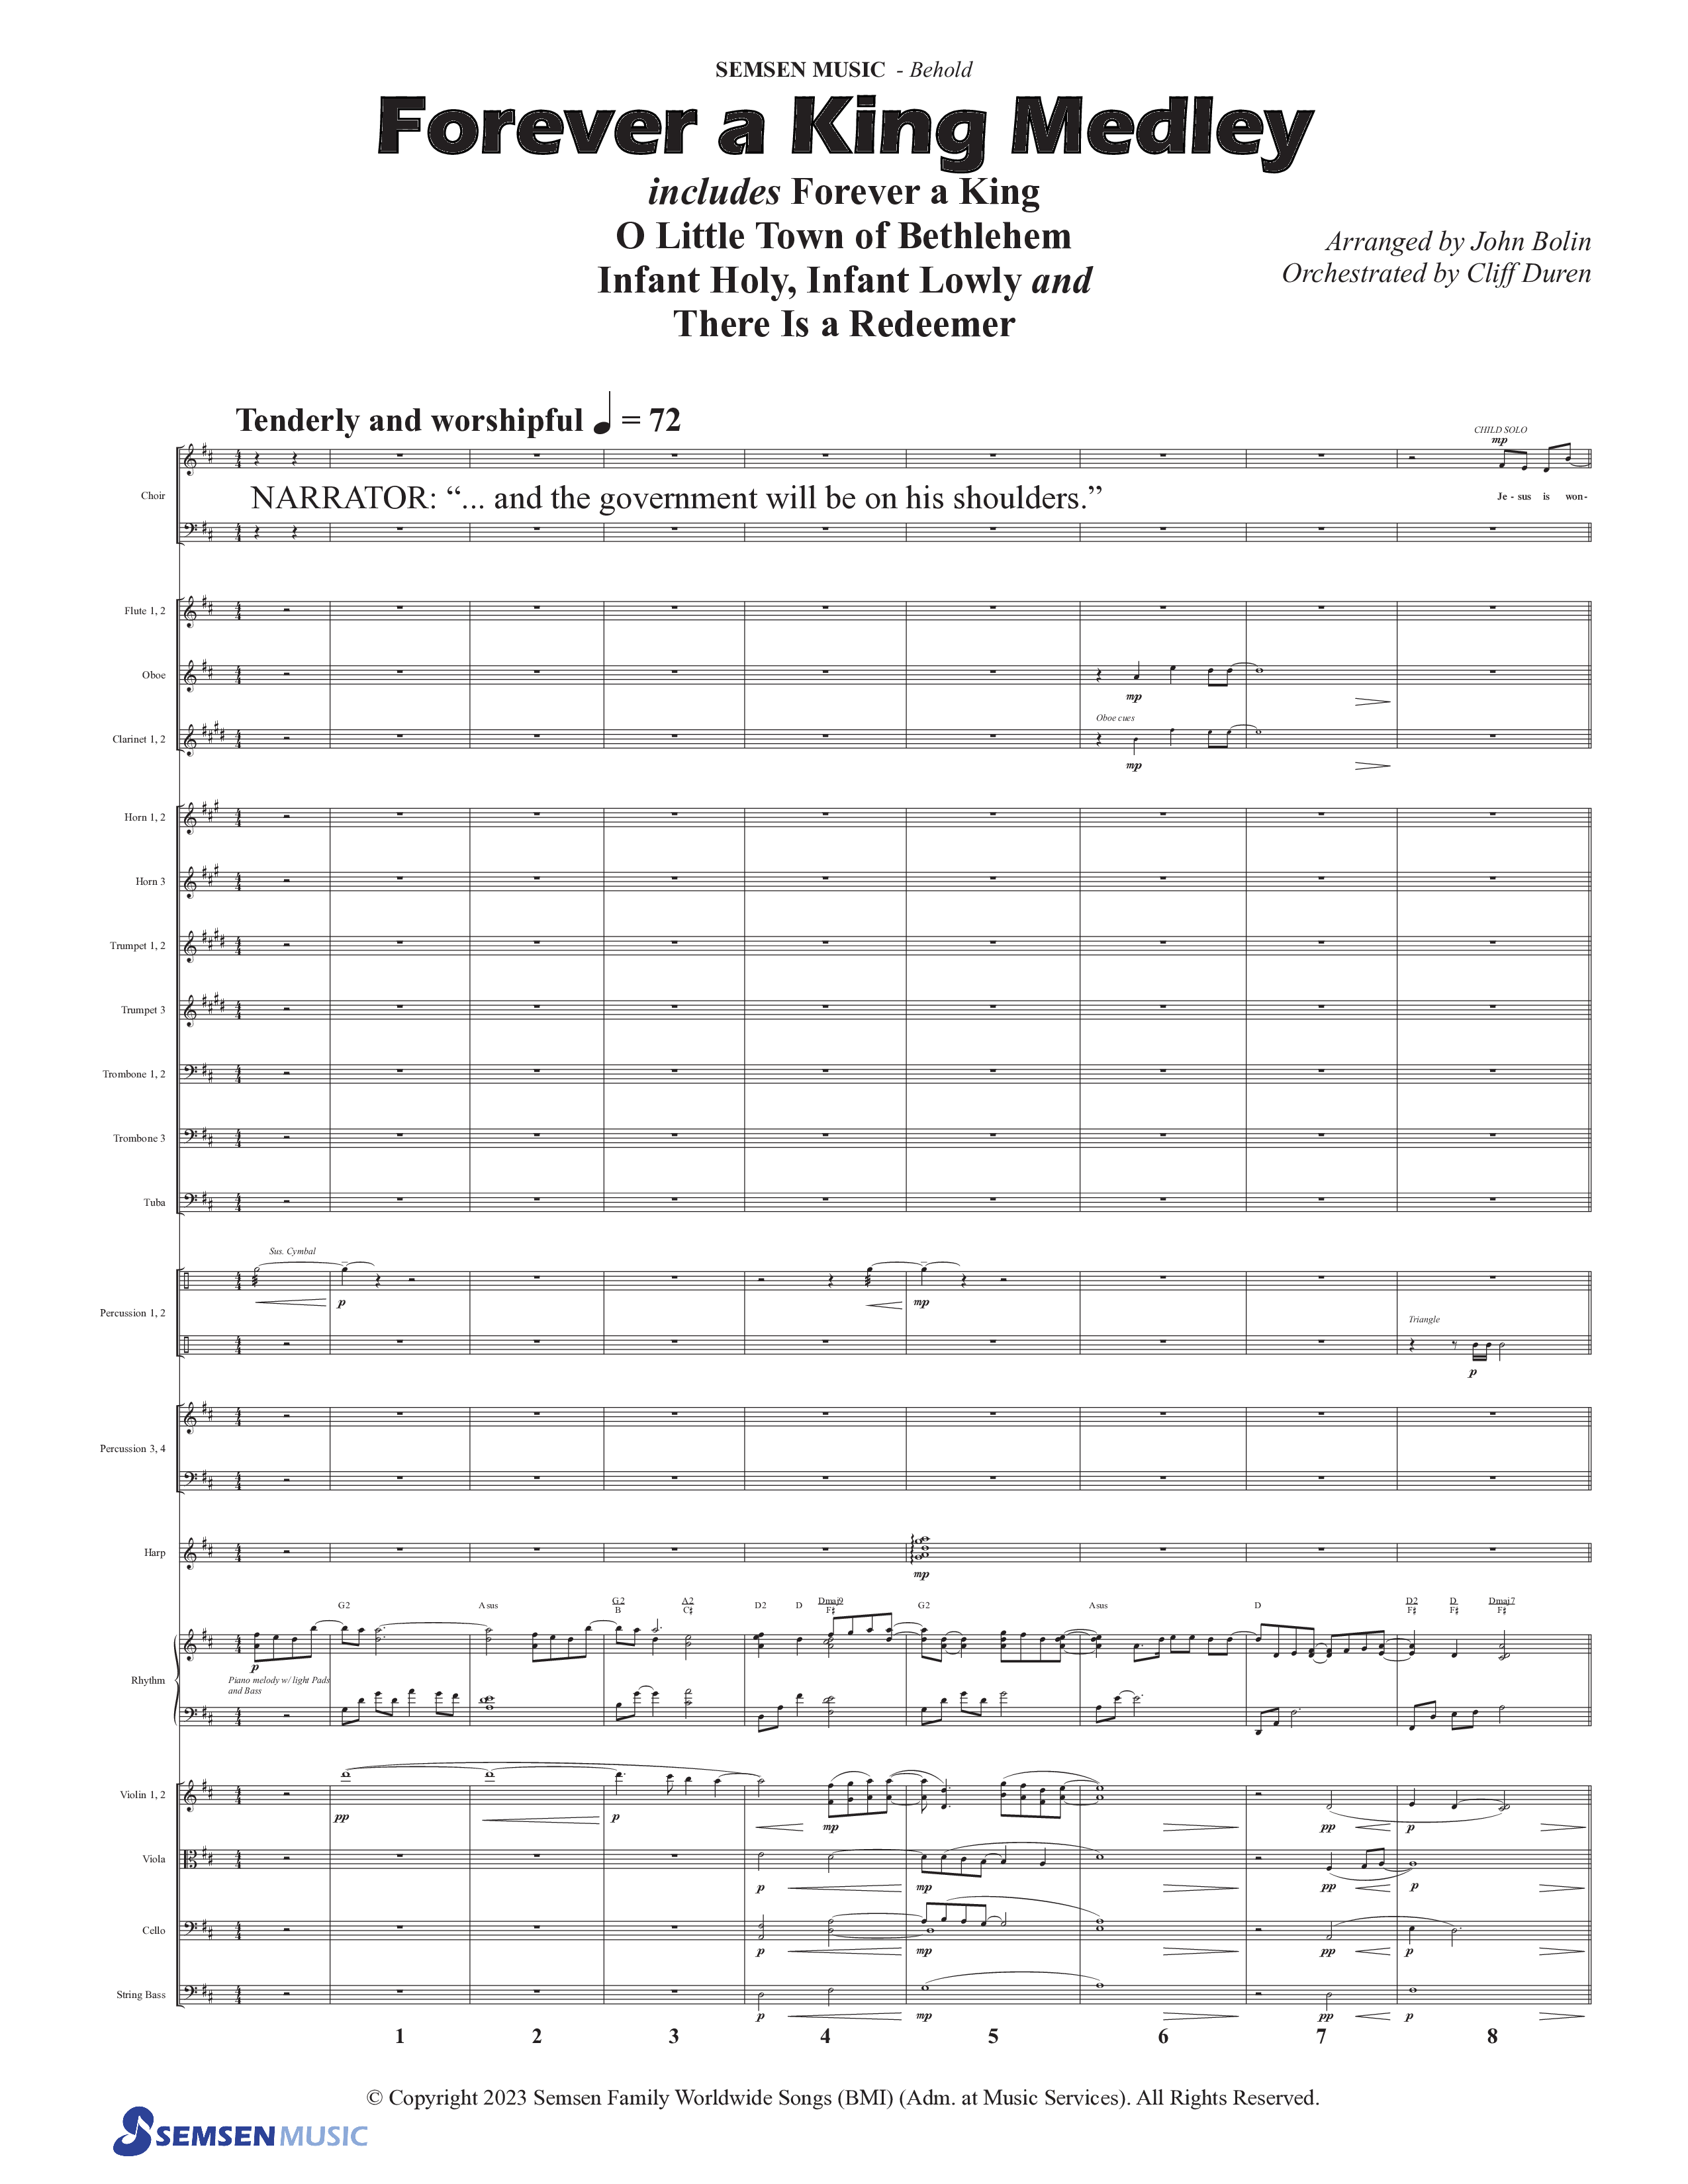 Behold (9 Song Choral Collection) Song 6 (Orchestration) (Semsen Music / Arr. John Bolin / Orch. Cliff Duren)